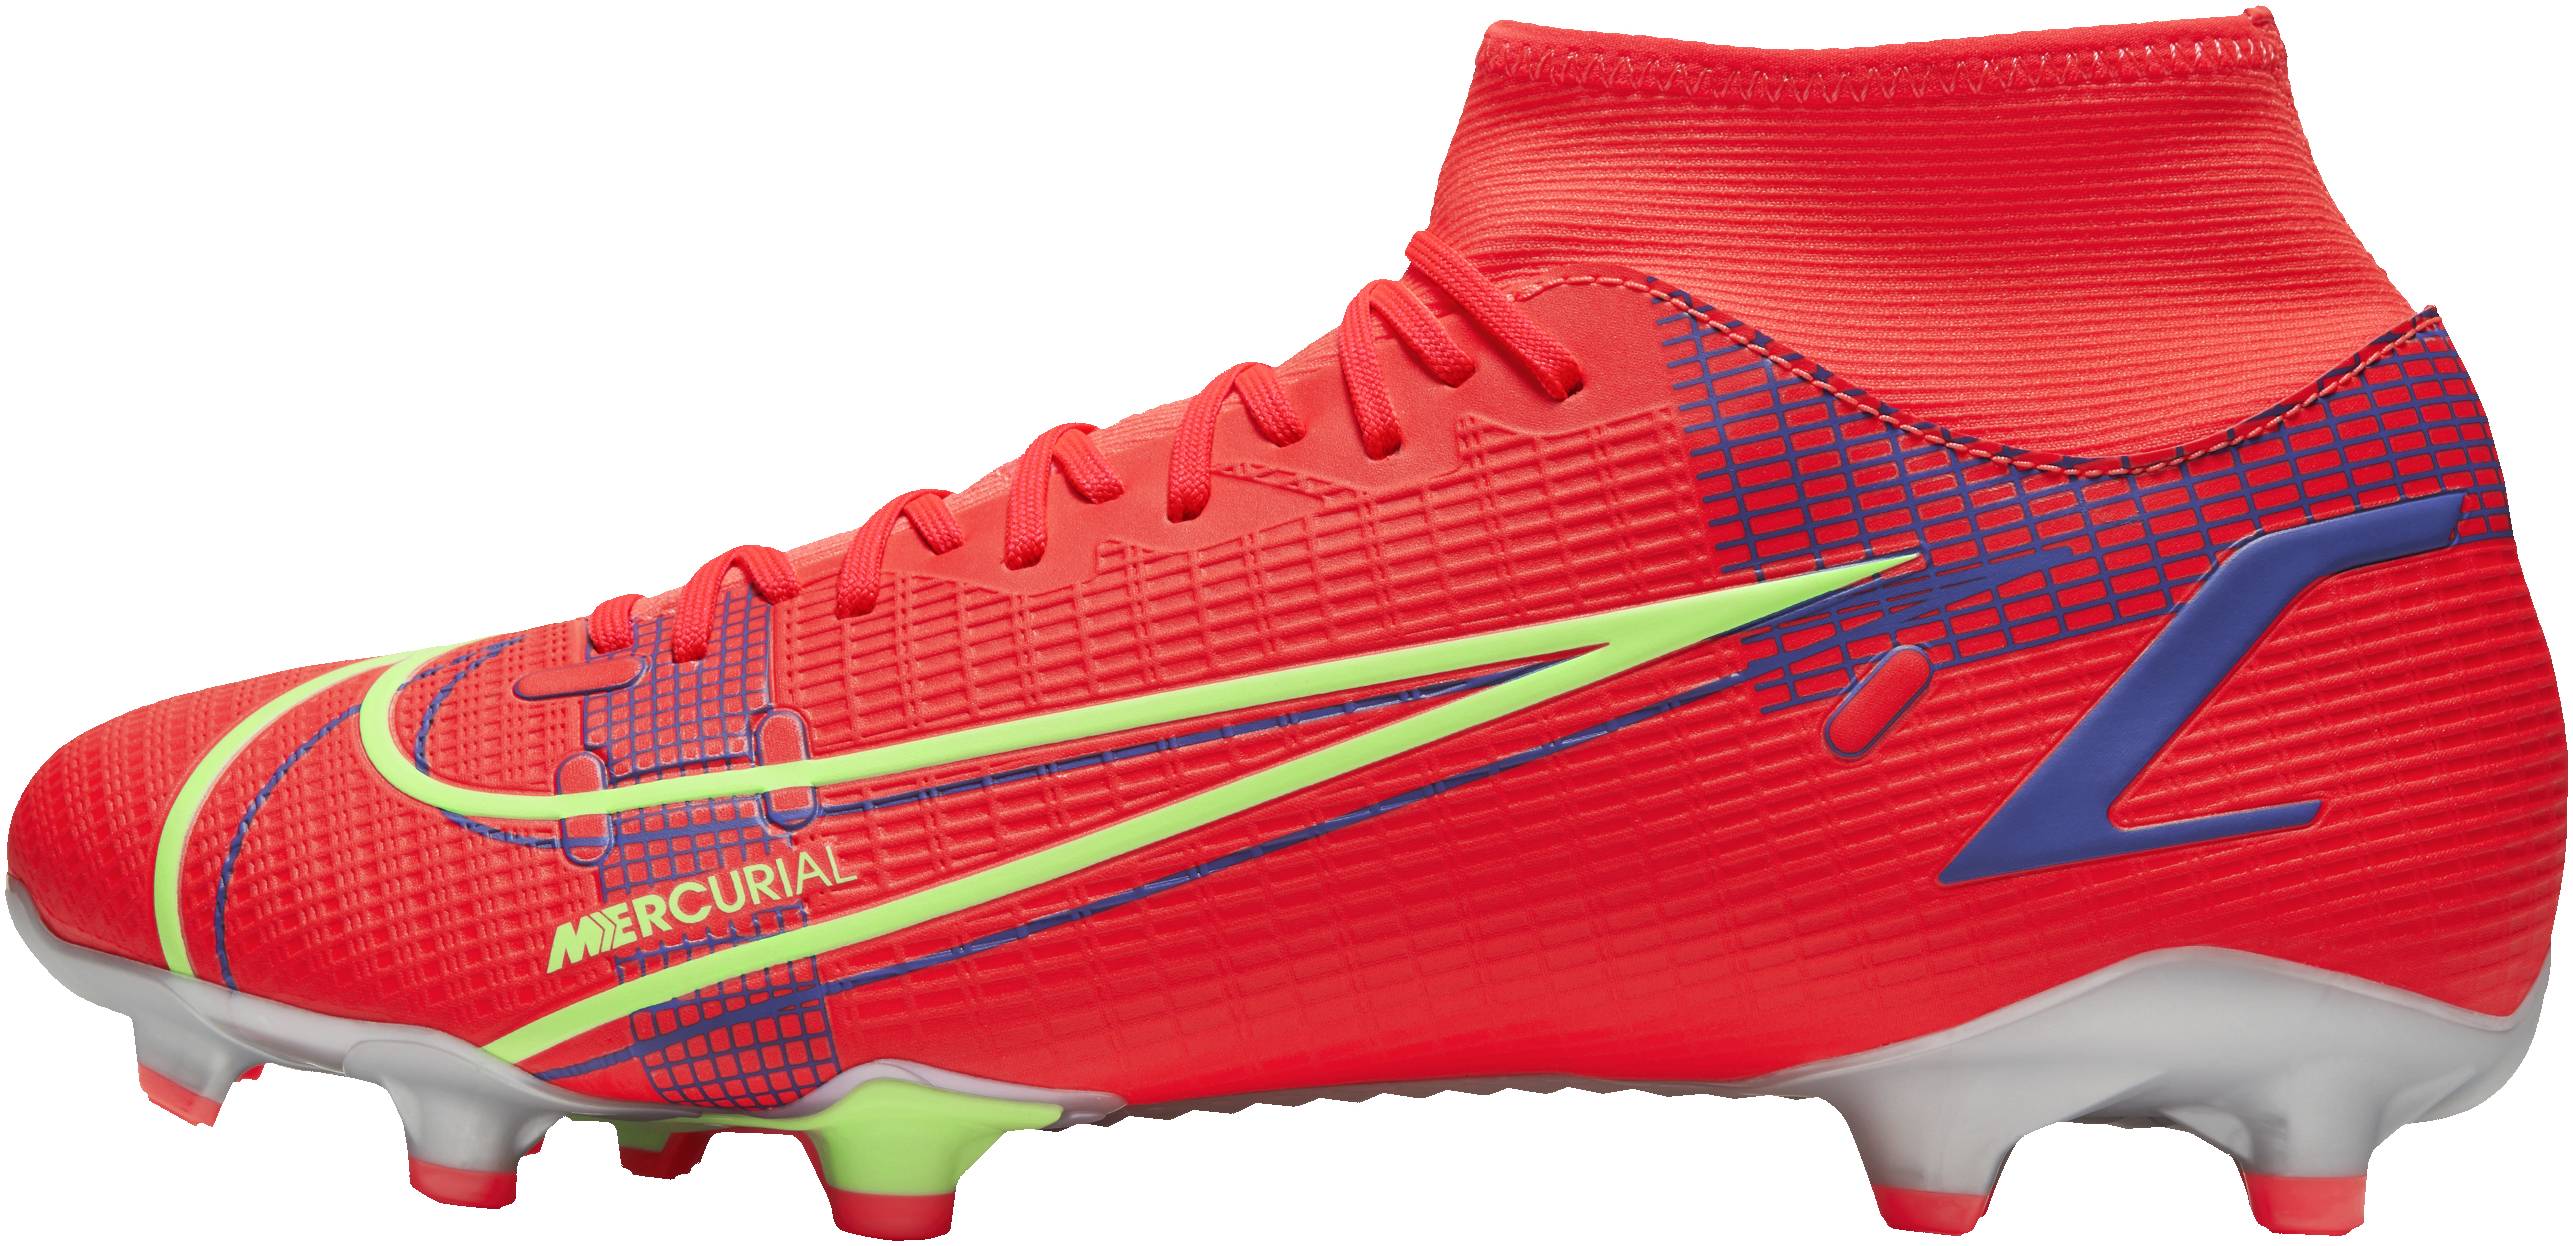 red nike soccer boots, big selling UP 